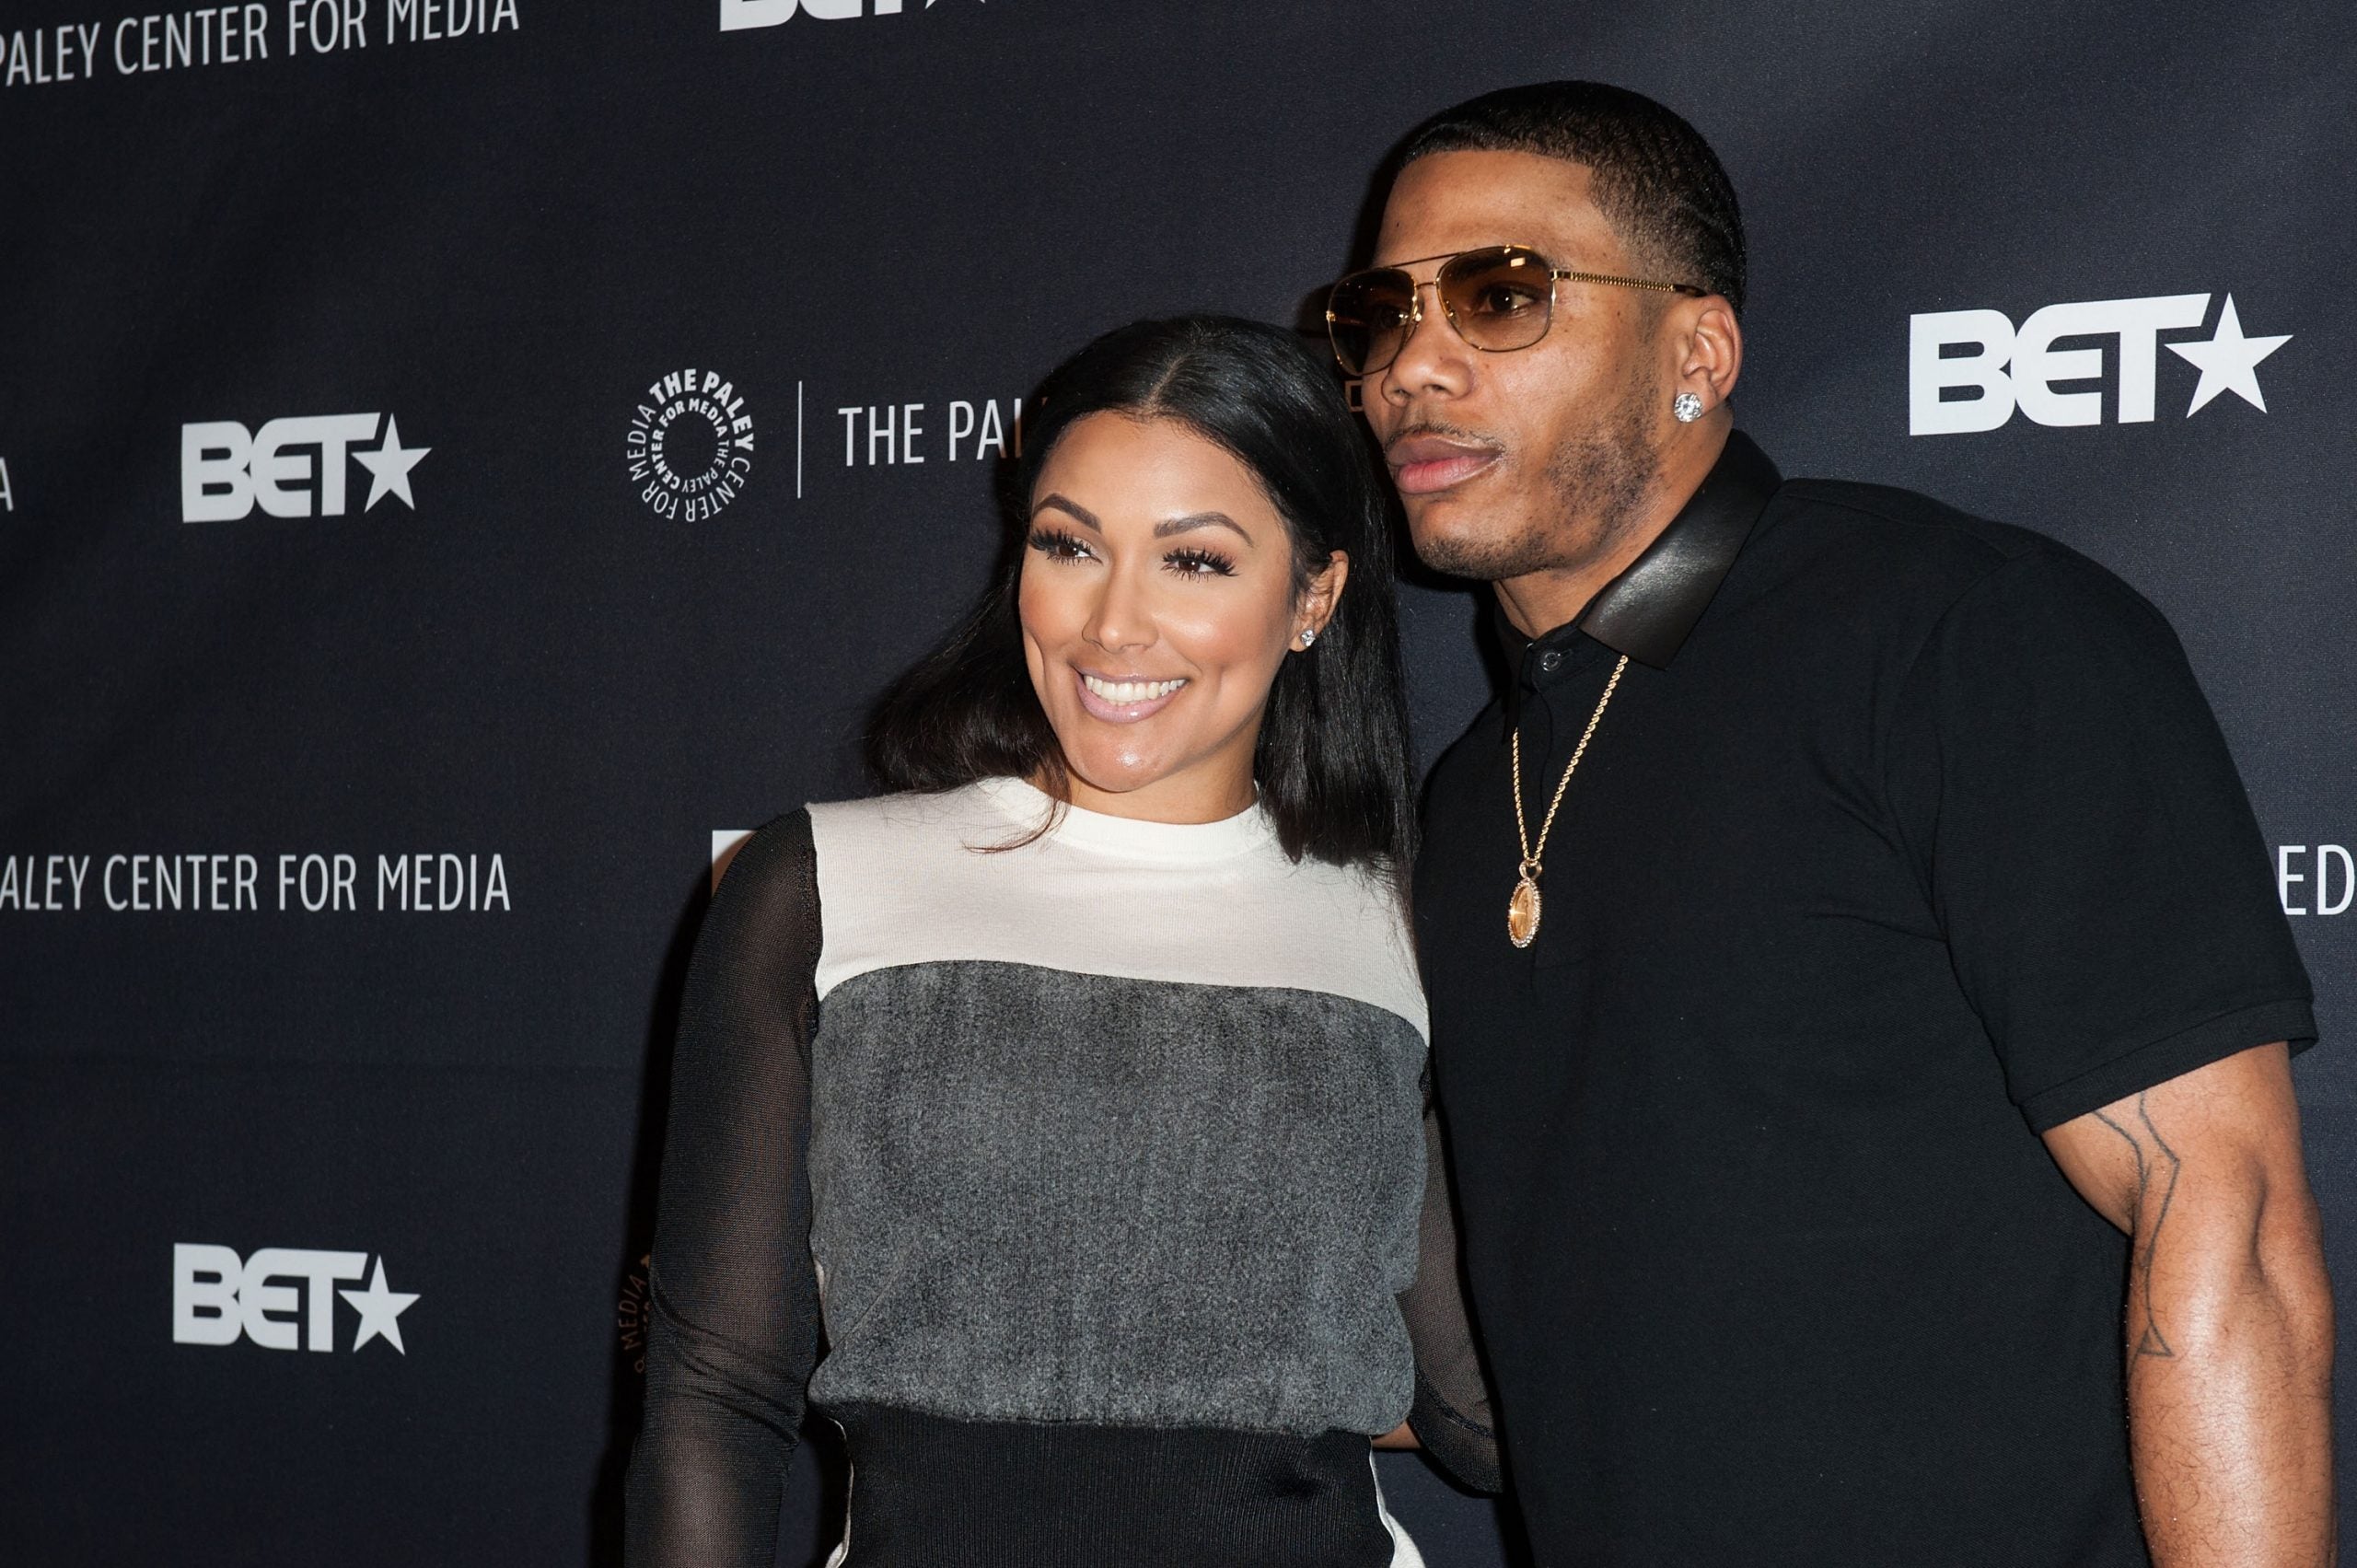 Nelly London on X: I'm really happy at the moment, don't know if